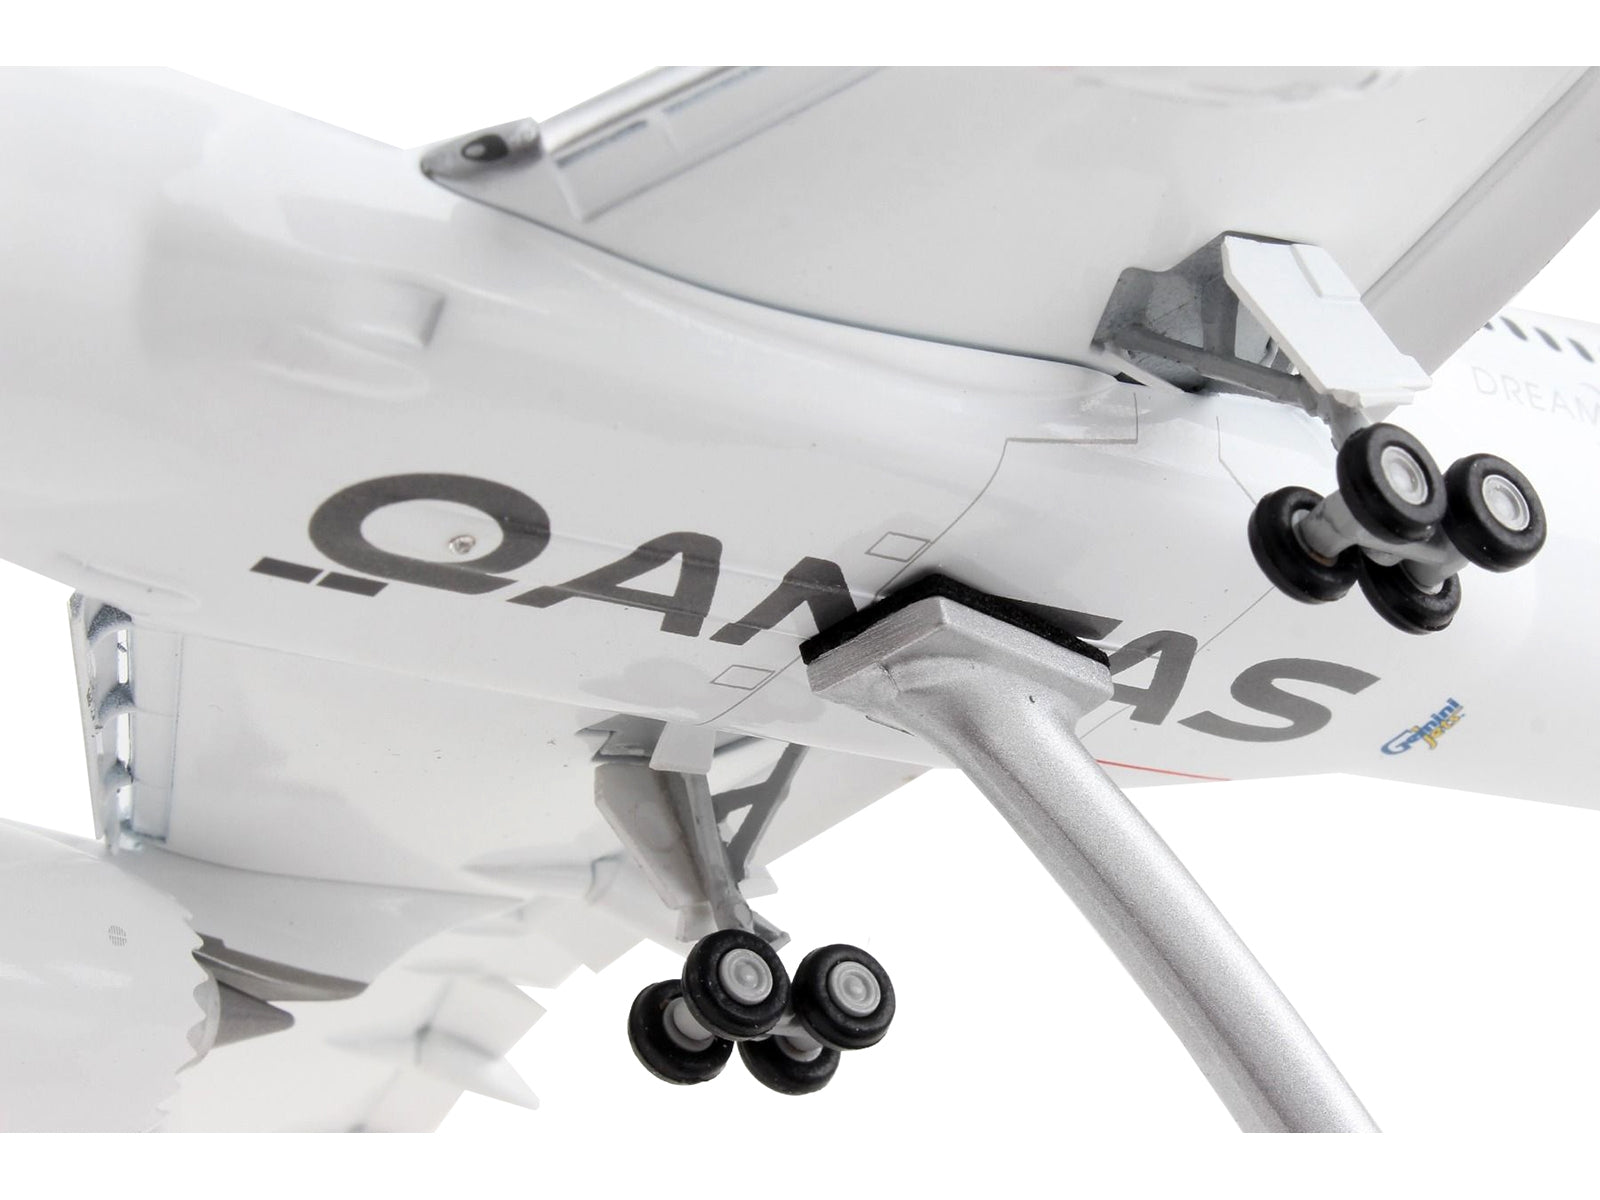 Boeing 787-9 Commercial Aircraft with Flaps Down "Qantas Airways - Spirit of Australia" White with Red Tail